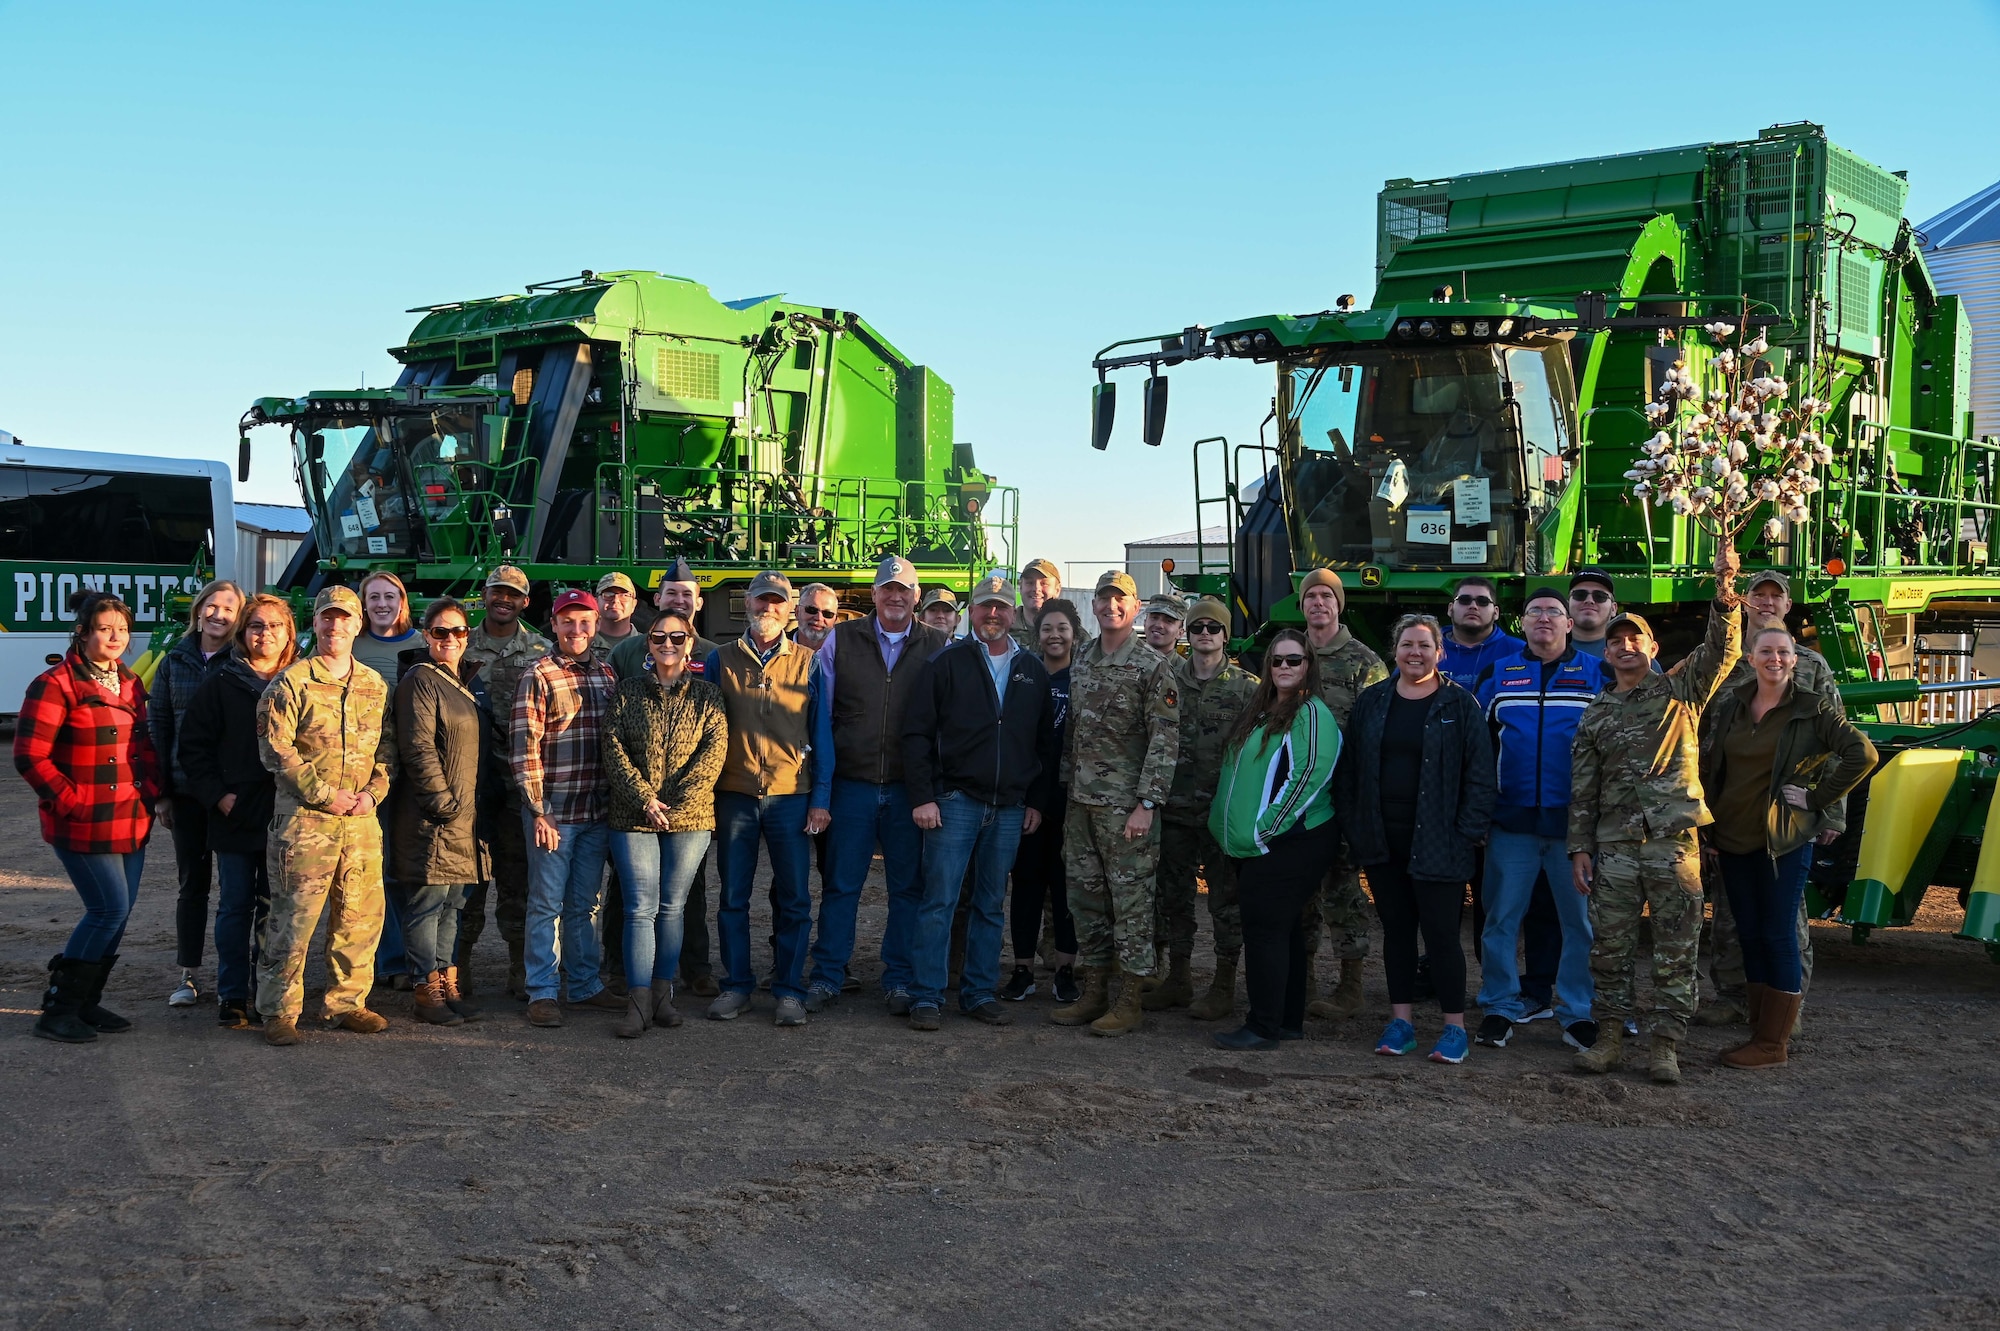 Airmen from the 97th Air Mobility Wing pose for a photo with the City of Altus and local community members during Farm City Week in Altus, Oklahoma, Nov. 17, 2022. Every year during Farm City Week, Airmen from Altus Air Force Base and members of Altus’ agricultural community take time to strengthen their relationship by learning more about each other’s mission and role in the community (U.S. Air Force photo by Senior Airman Kayla Christenson)